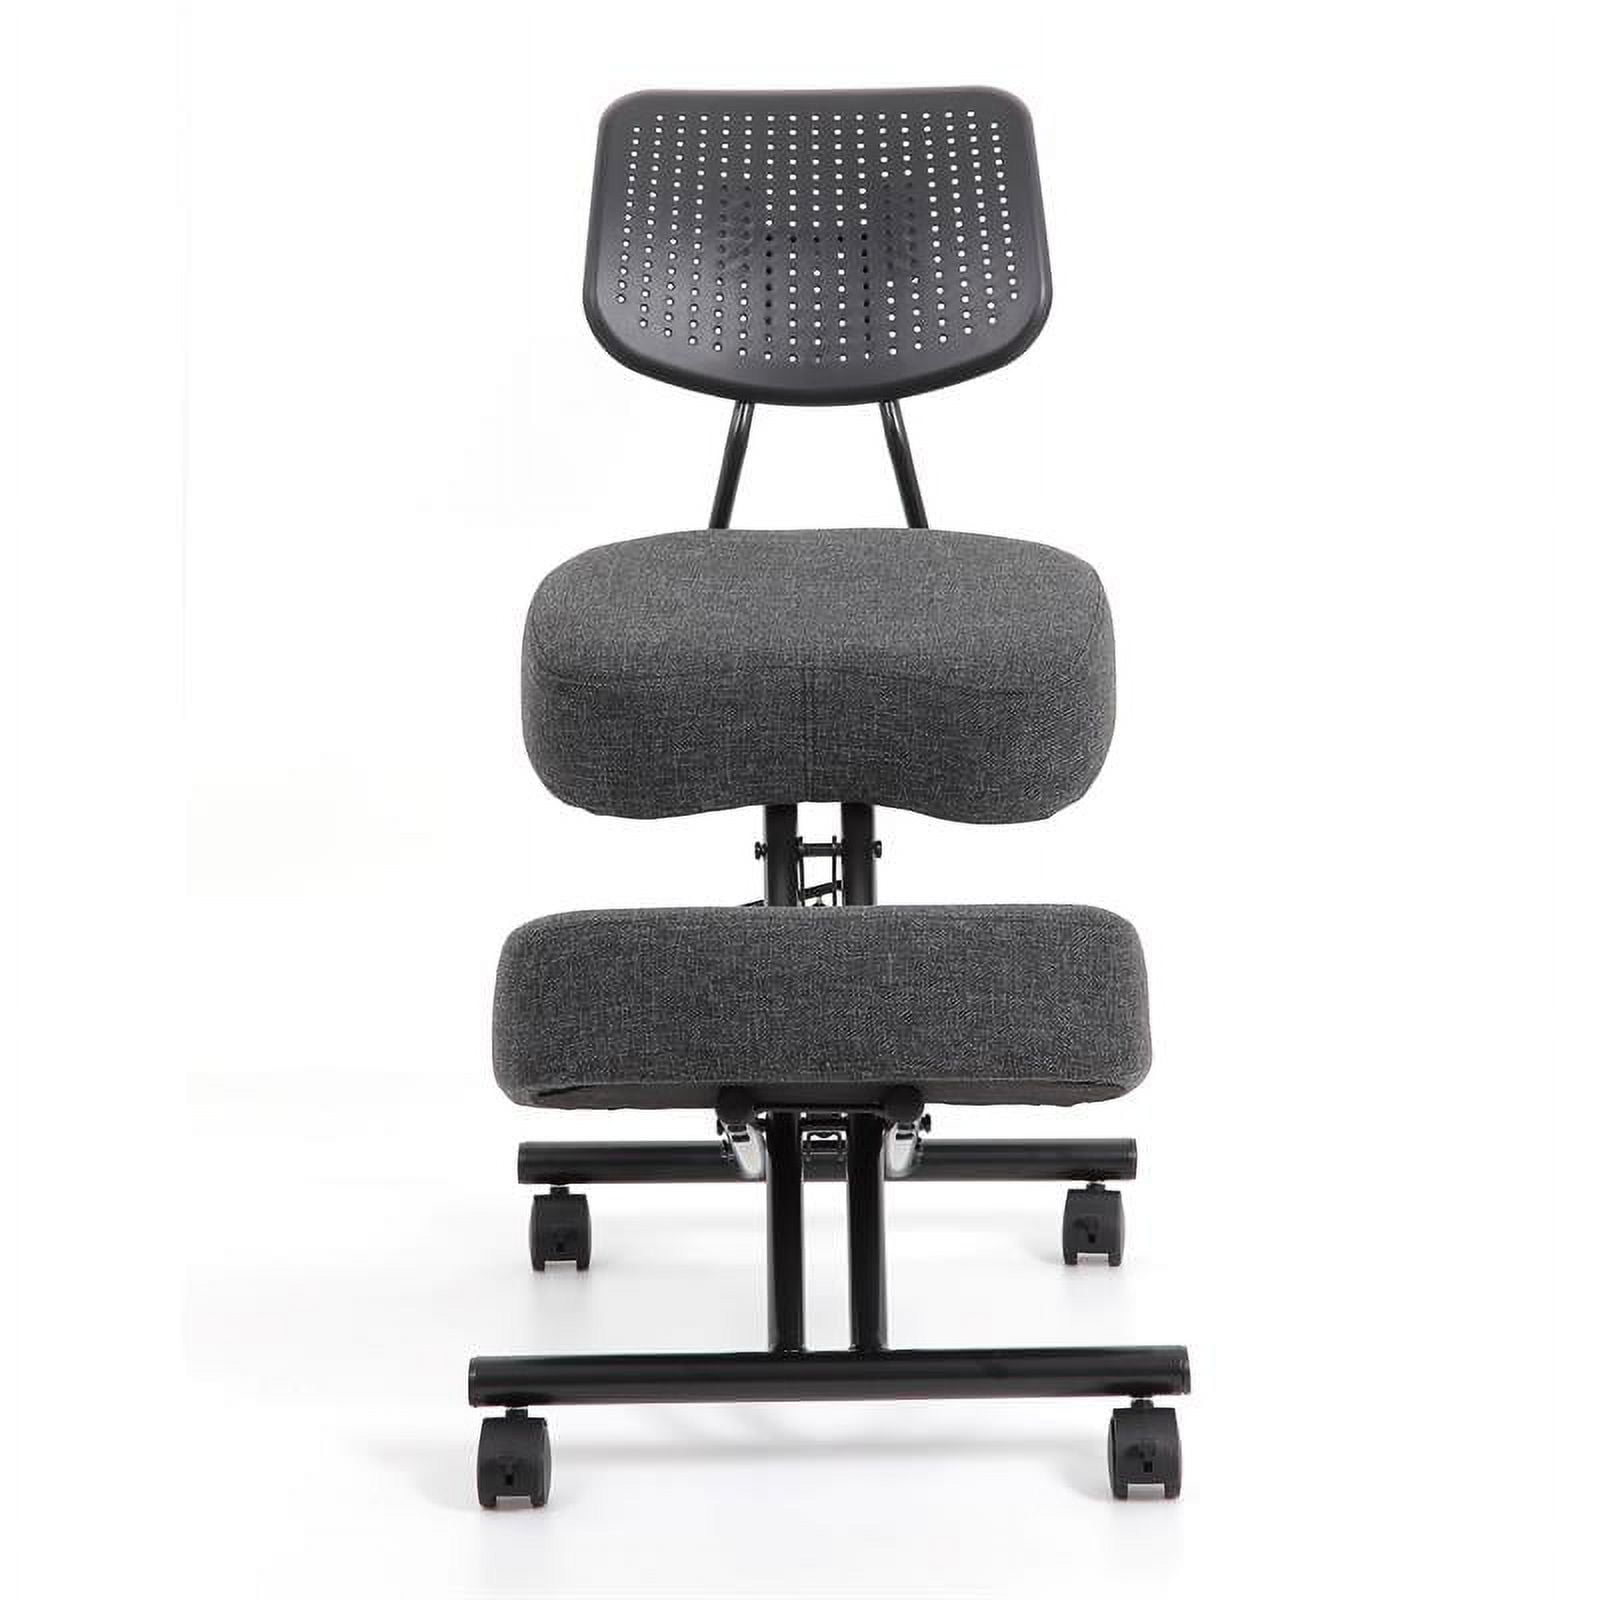 Emma + Oliver Mobile Wooden Ergonomic Kneeling Office Chair in Gray Fabric